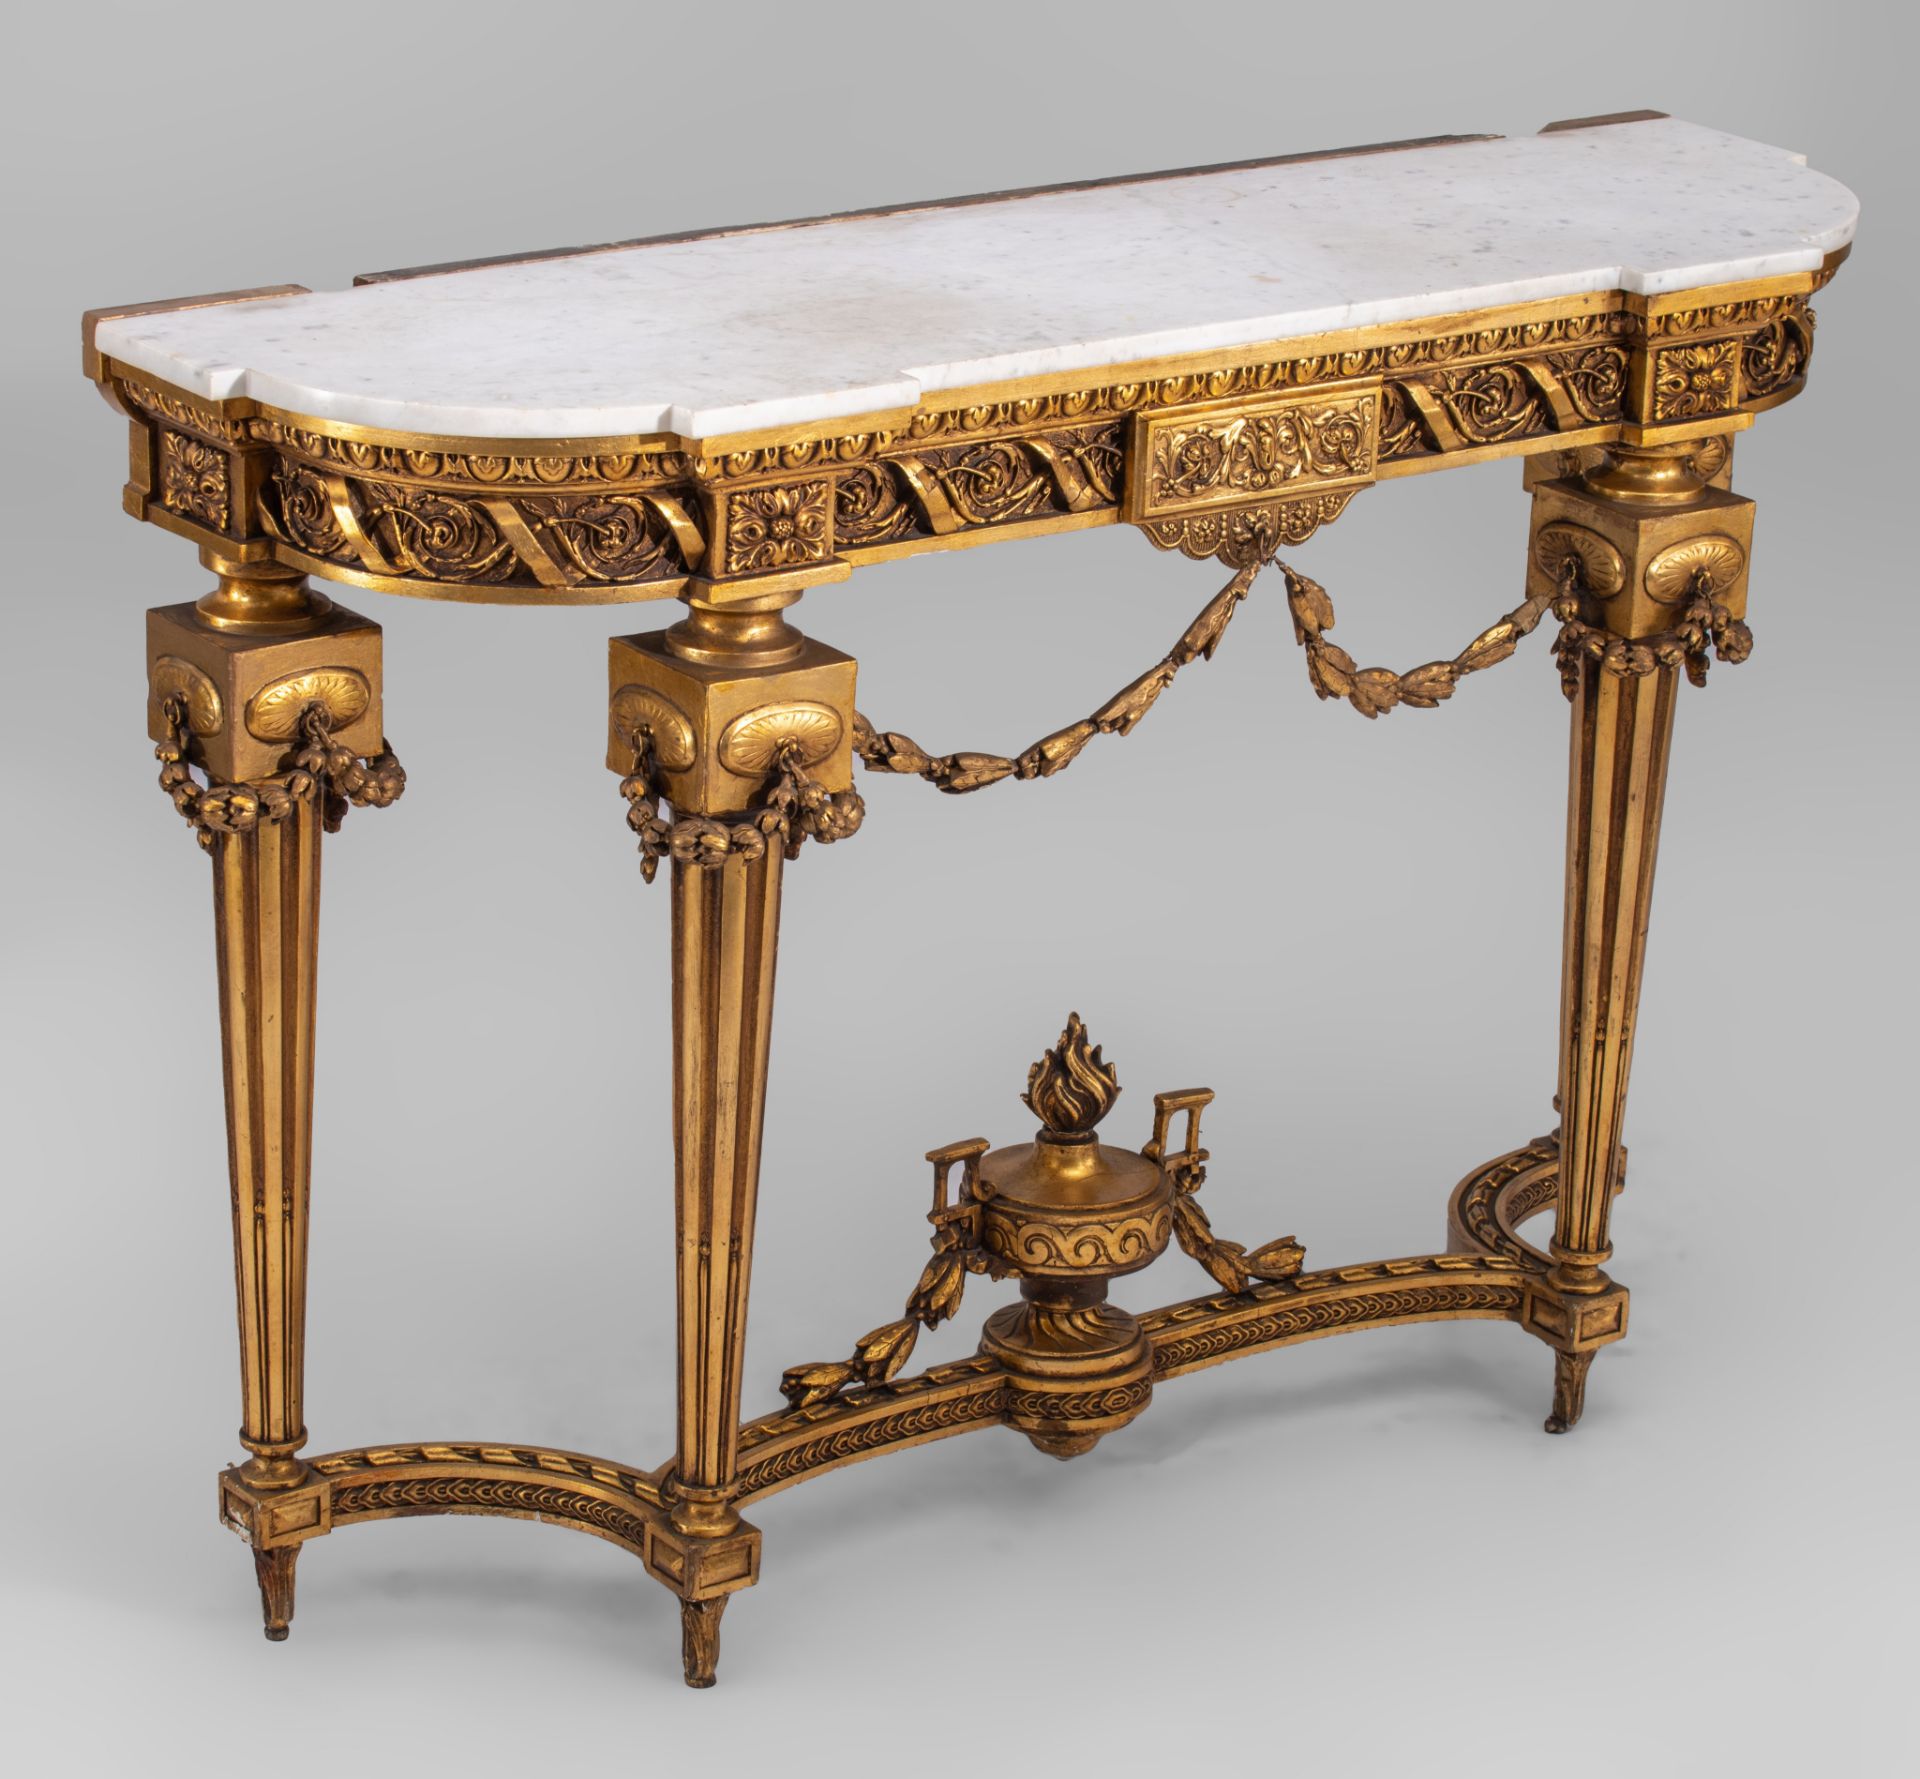 An imposing Neoclassical console table and matching wall mirror, H 92 - W 137 - D 40 - 116 x 191 cm - Image 6 of 11